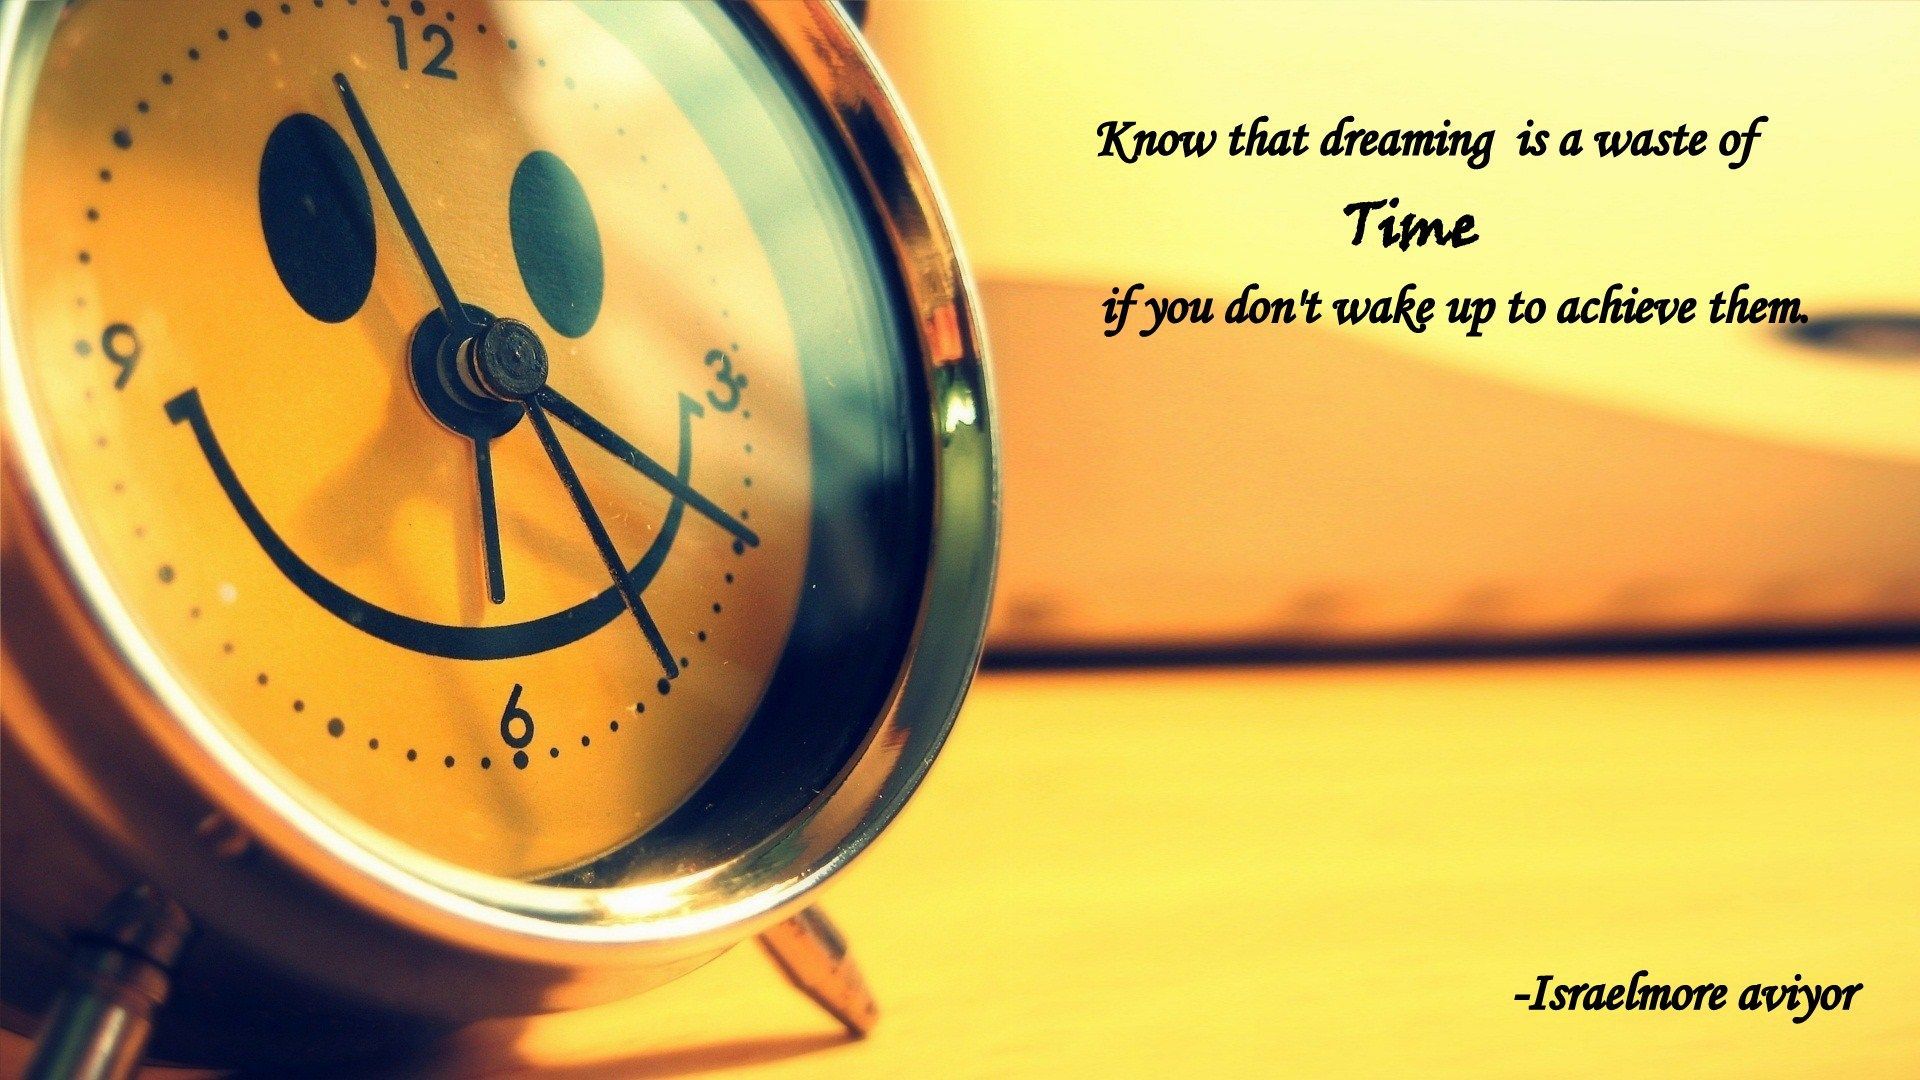 Time Management Quotes & HD Wallpaper for Bloggers. Time management quotes, HD quotes, Good life quotes